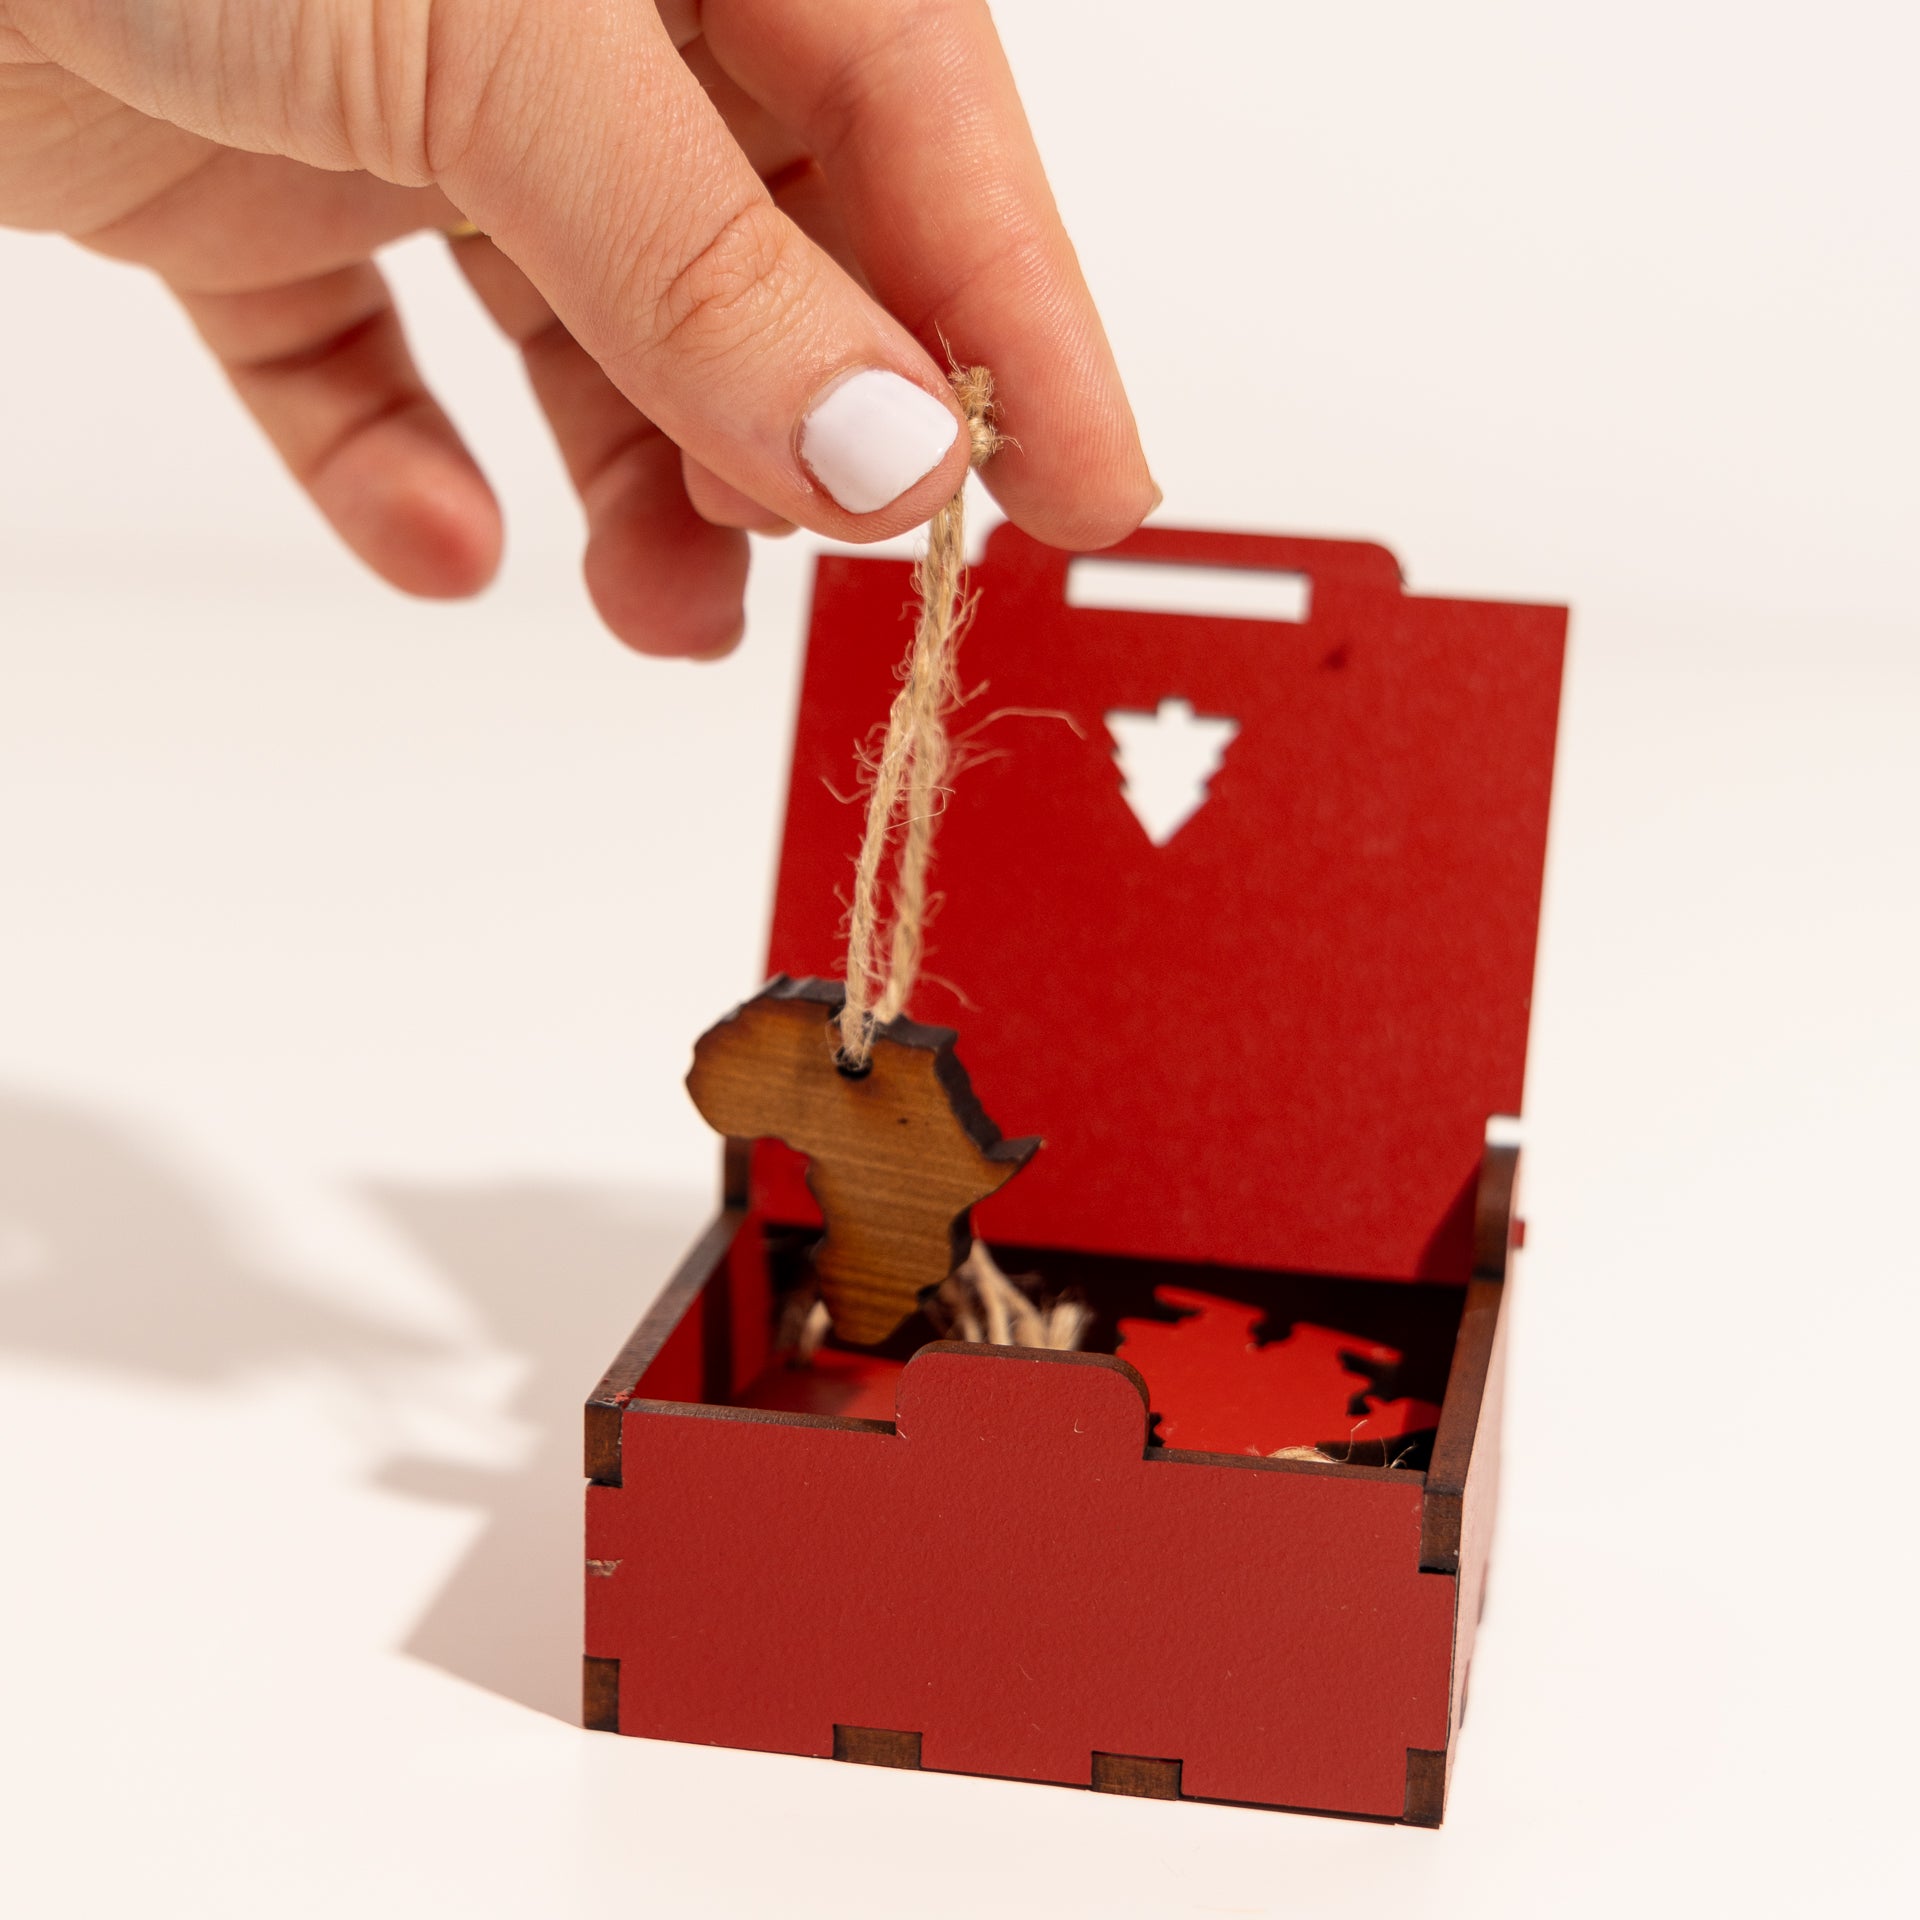 Mini Christmas Decorations in a Wooden Box (assorted colours)